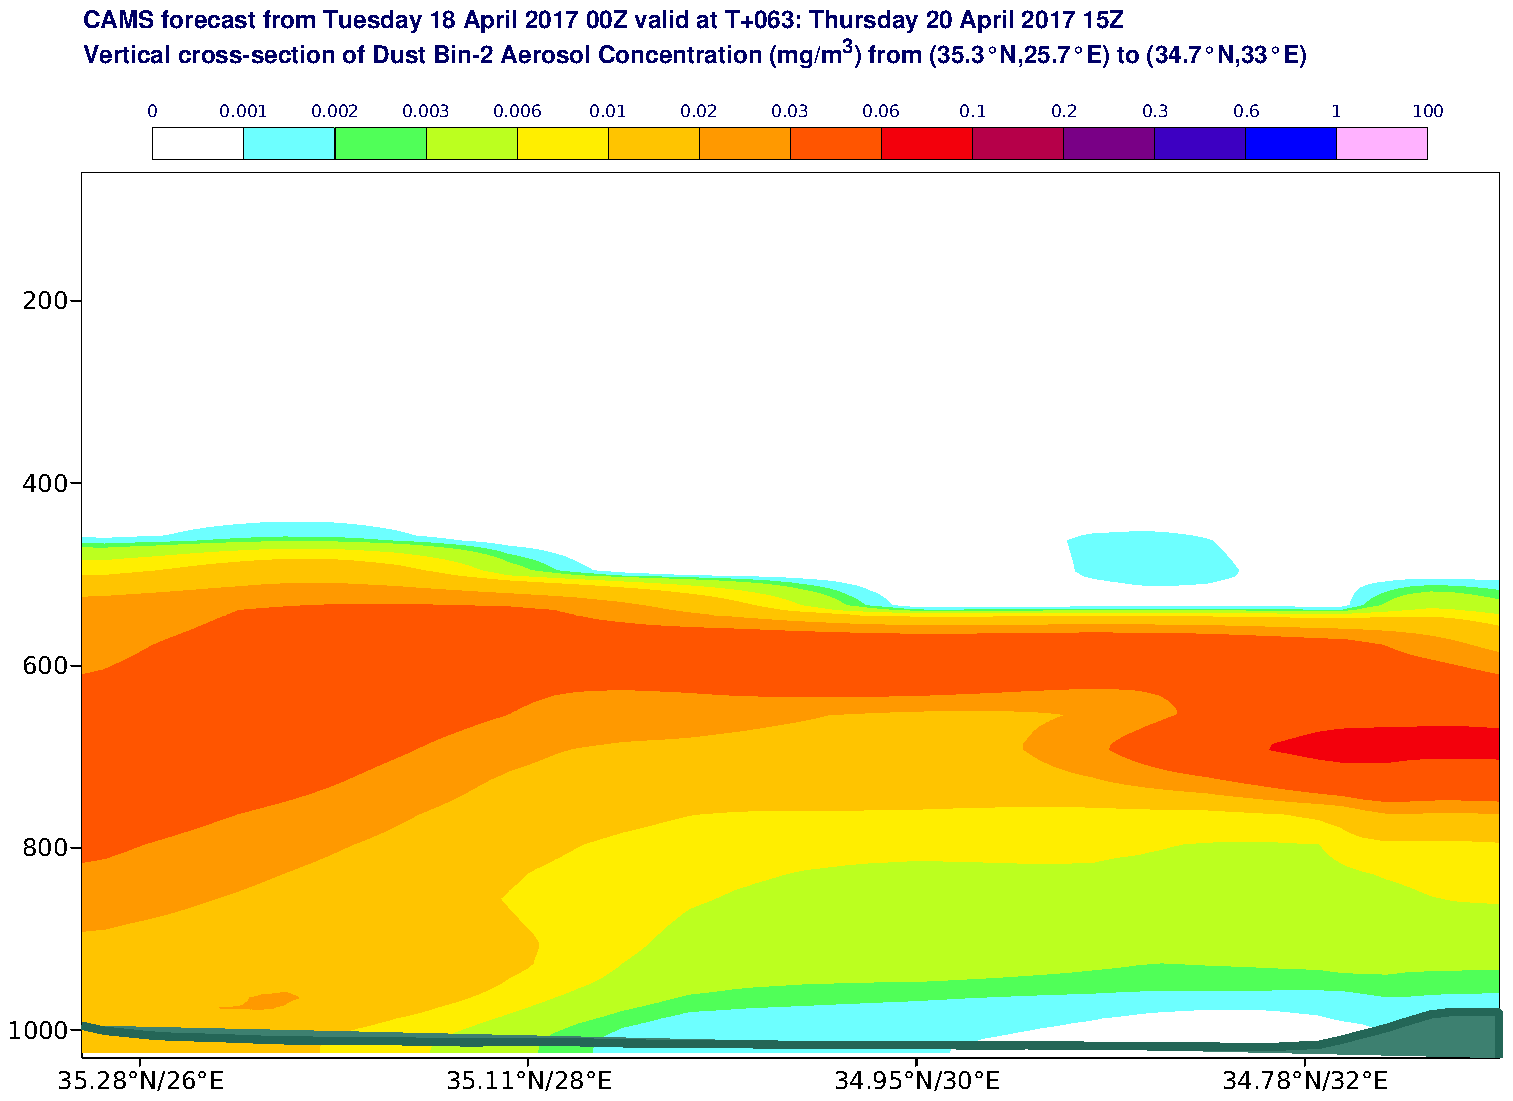 Vertical cross-section of Dust Bin-2 Aerosol Concentration (mg/m3) valid at T63 - 2017-04-20 15:00